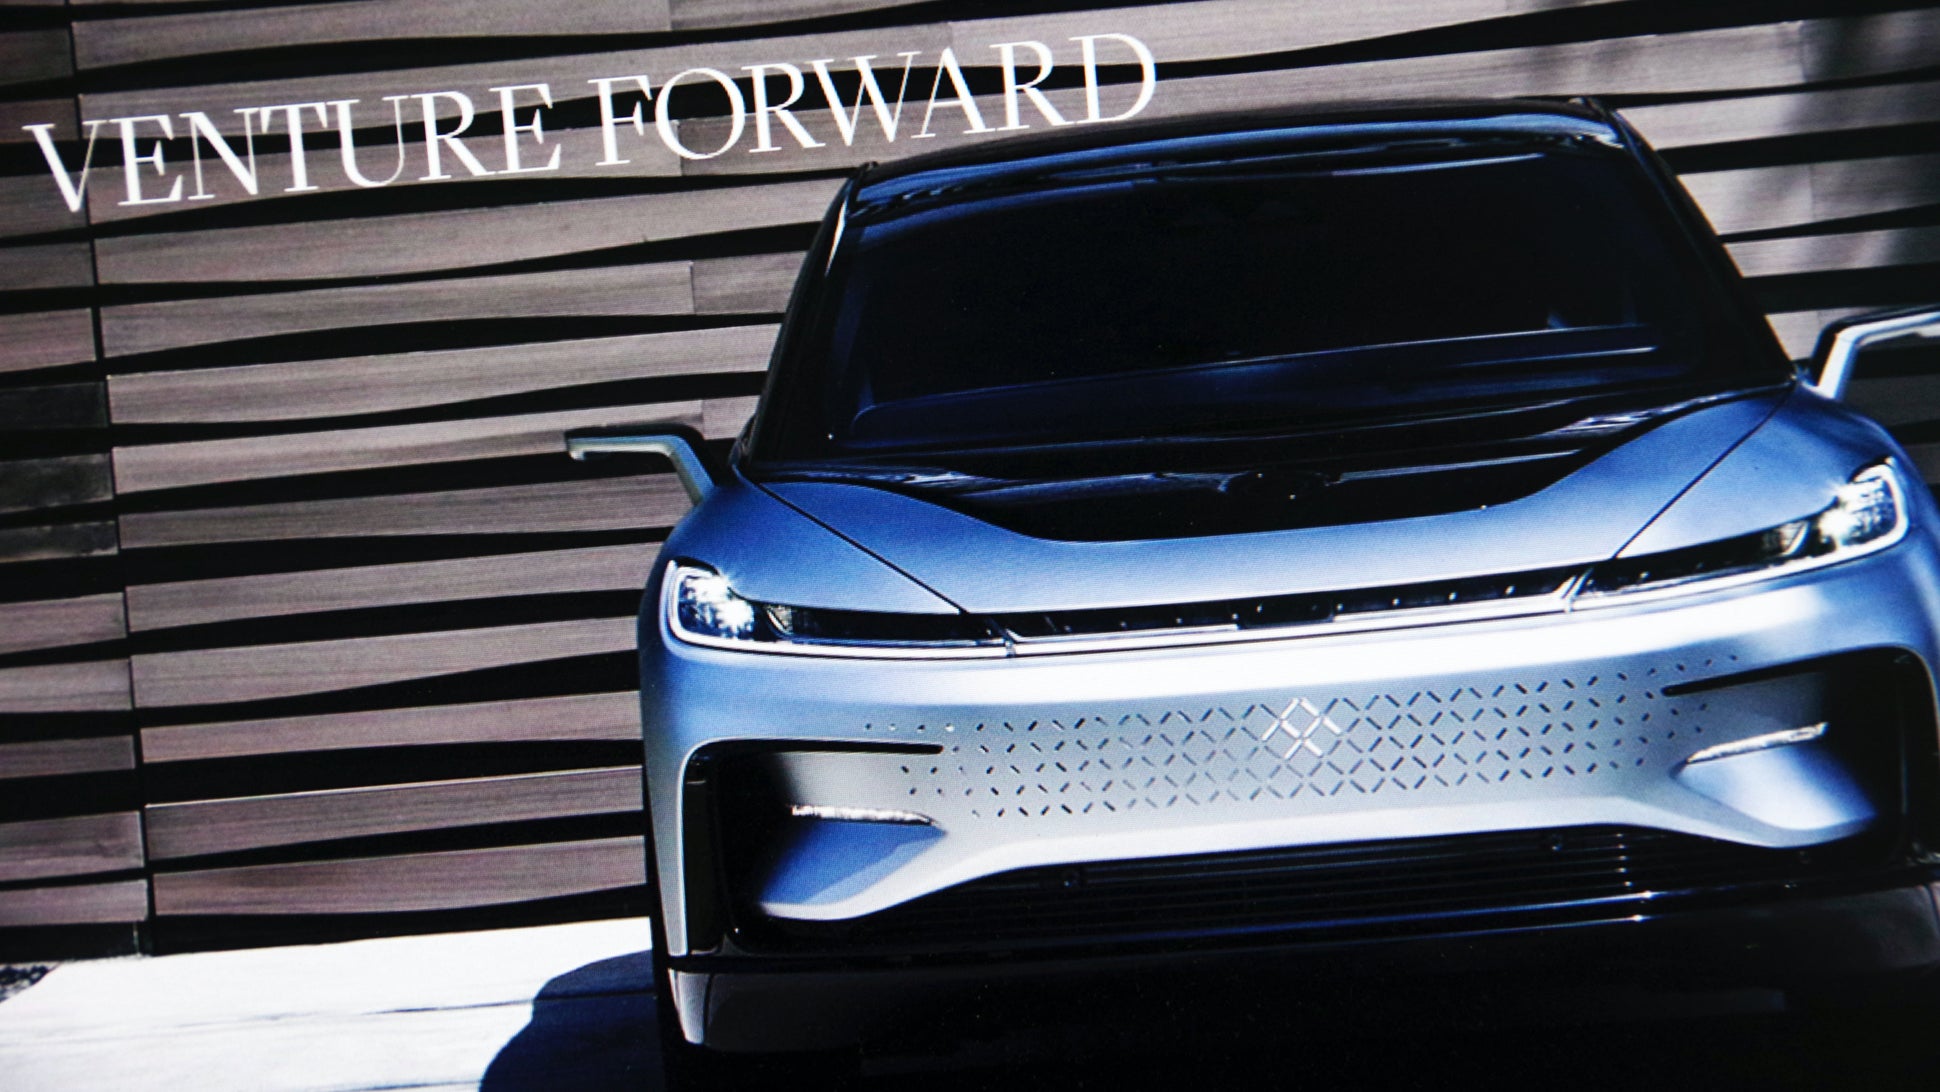 Faraday Future CEO’s Stake in Company and Mansions Frozen in yet Another Loan Dispute